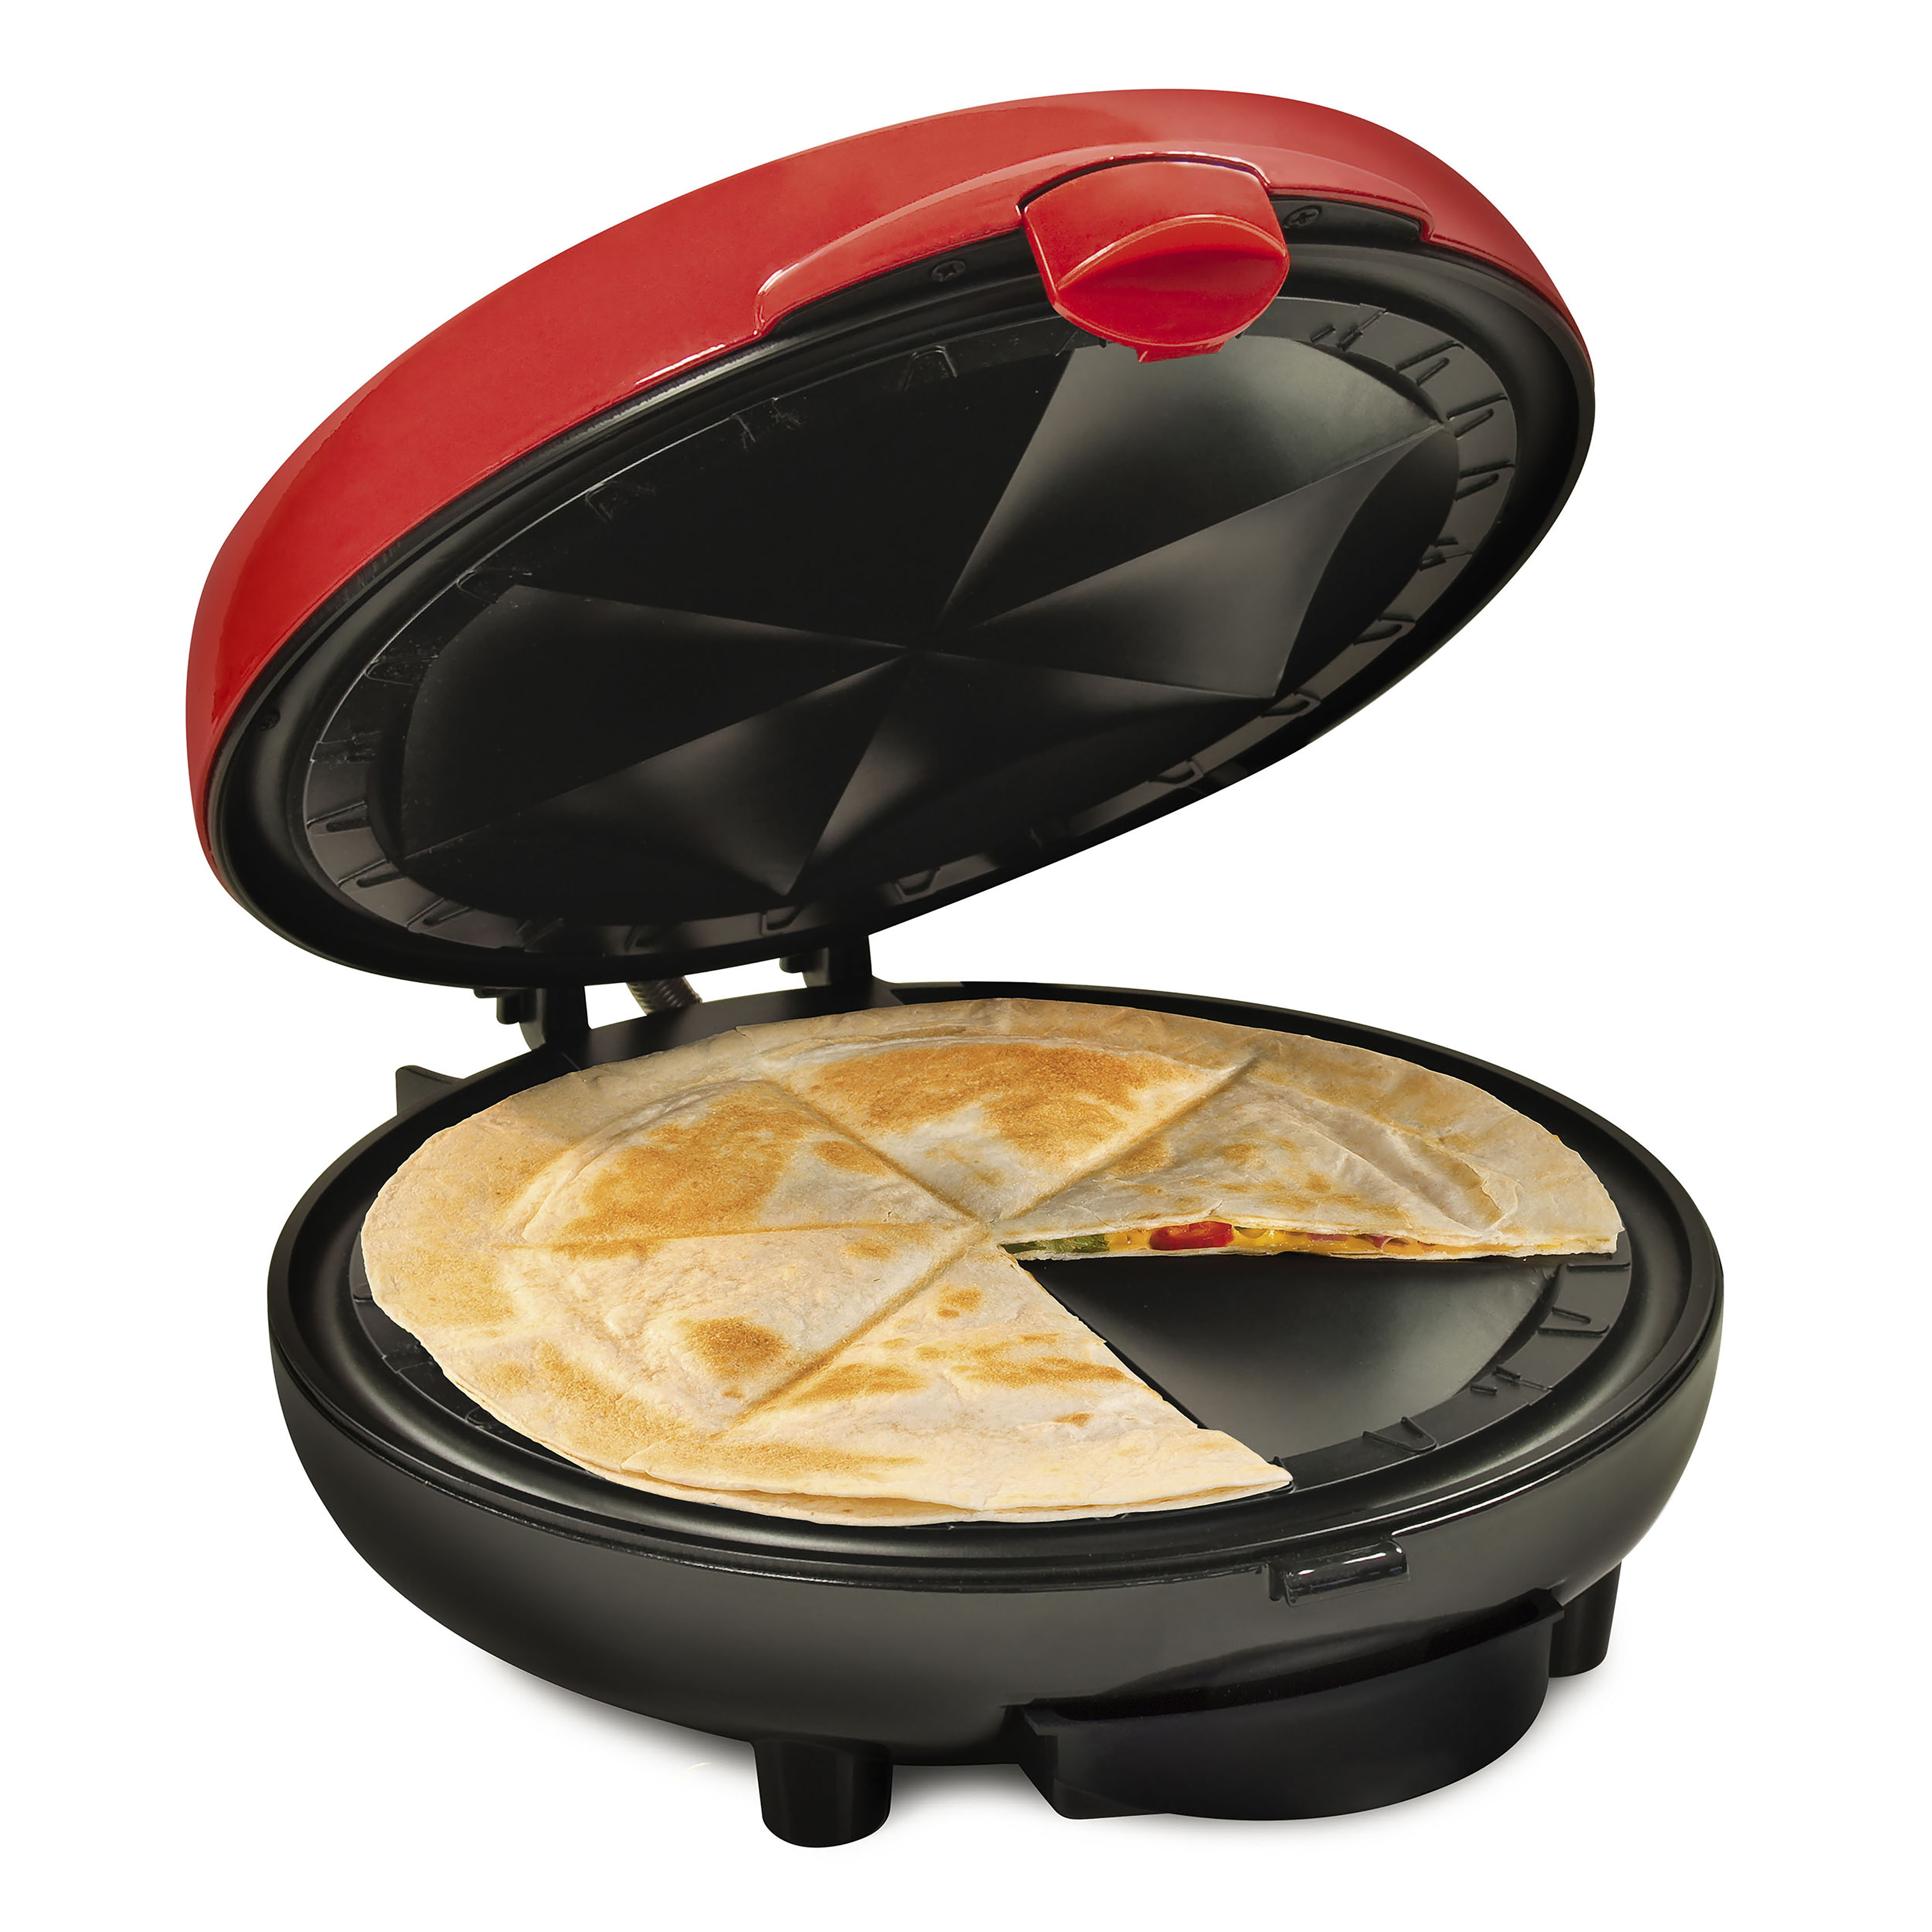  Nostalgia MyMini Personal Electric Heart Waffle Maker, 5-Inch  Cooking Surface, Waffle Iron for Hash Browns, French Toast, Grilled Cheese,  Quesadilla, Brownies, Cookies, Red: Home & Kitchen